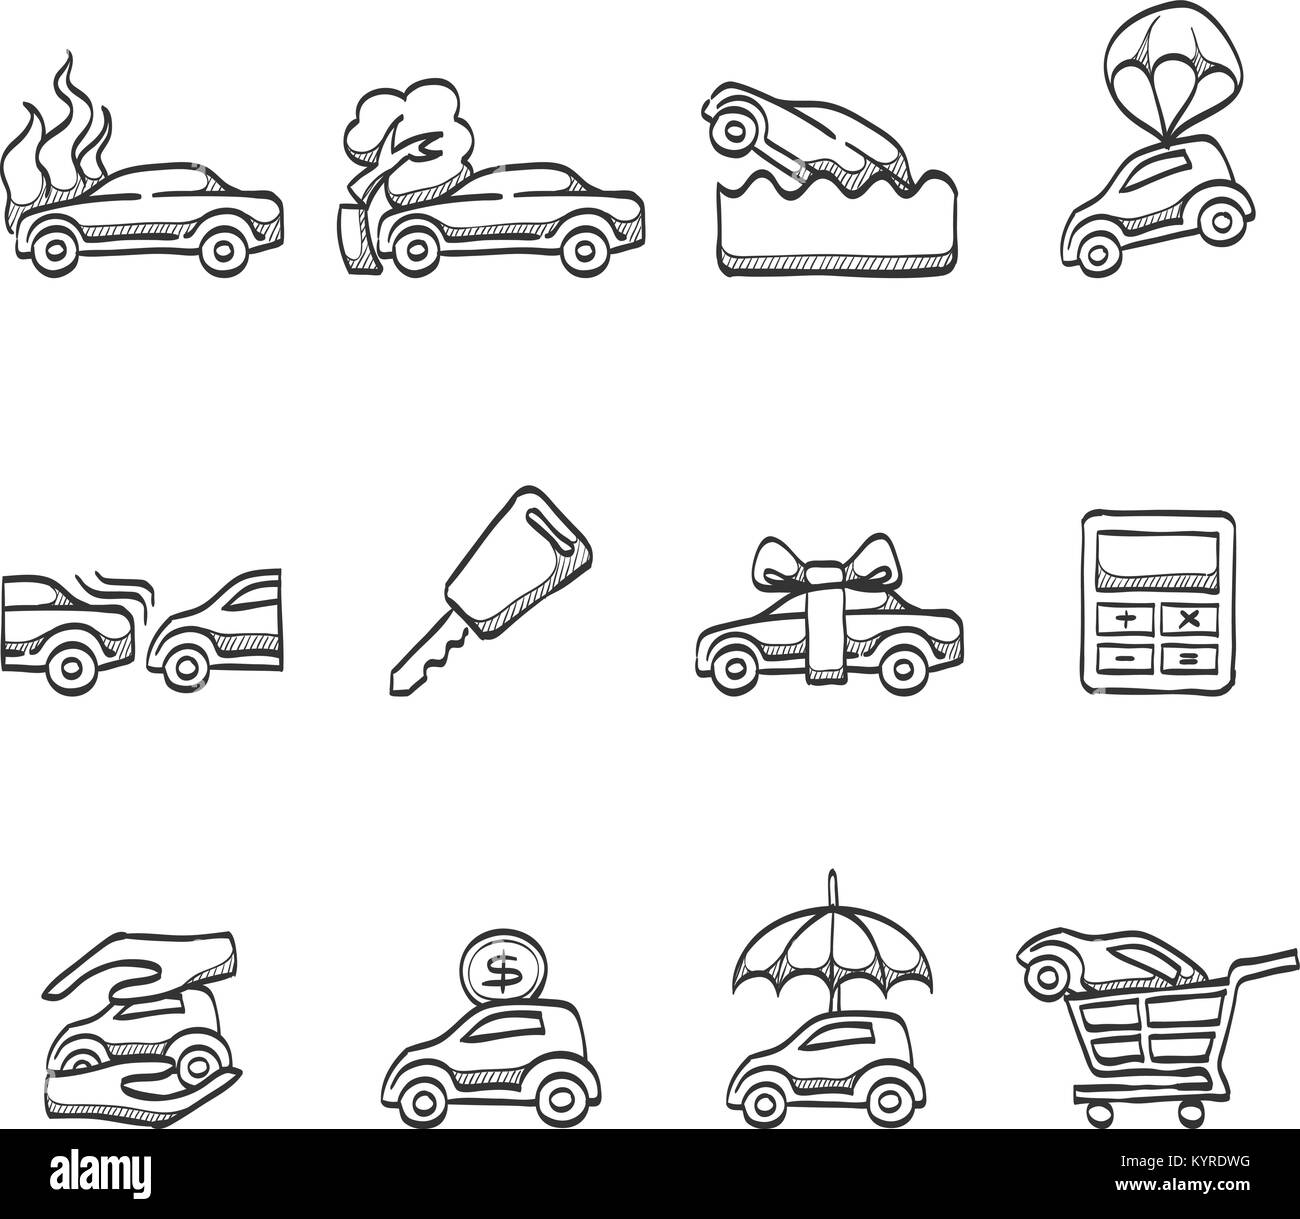 Car insurance icons in sketch. Stock Vector